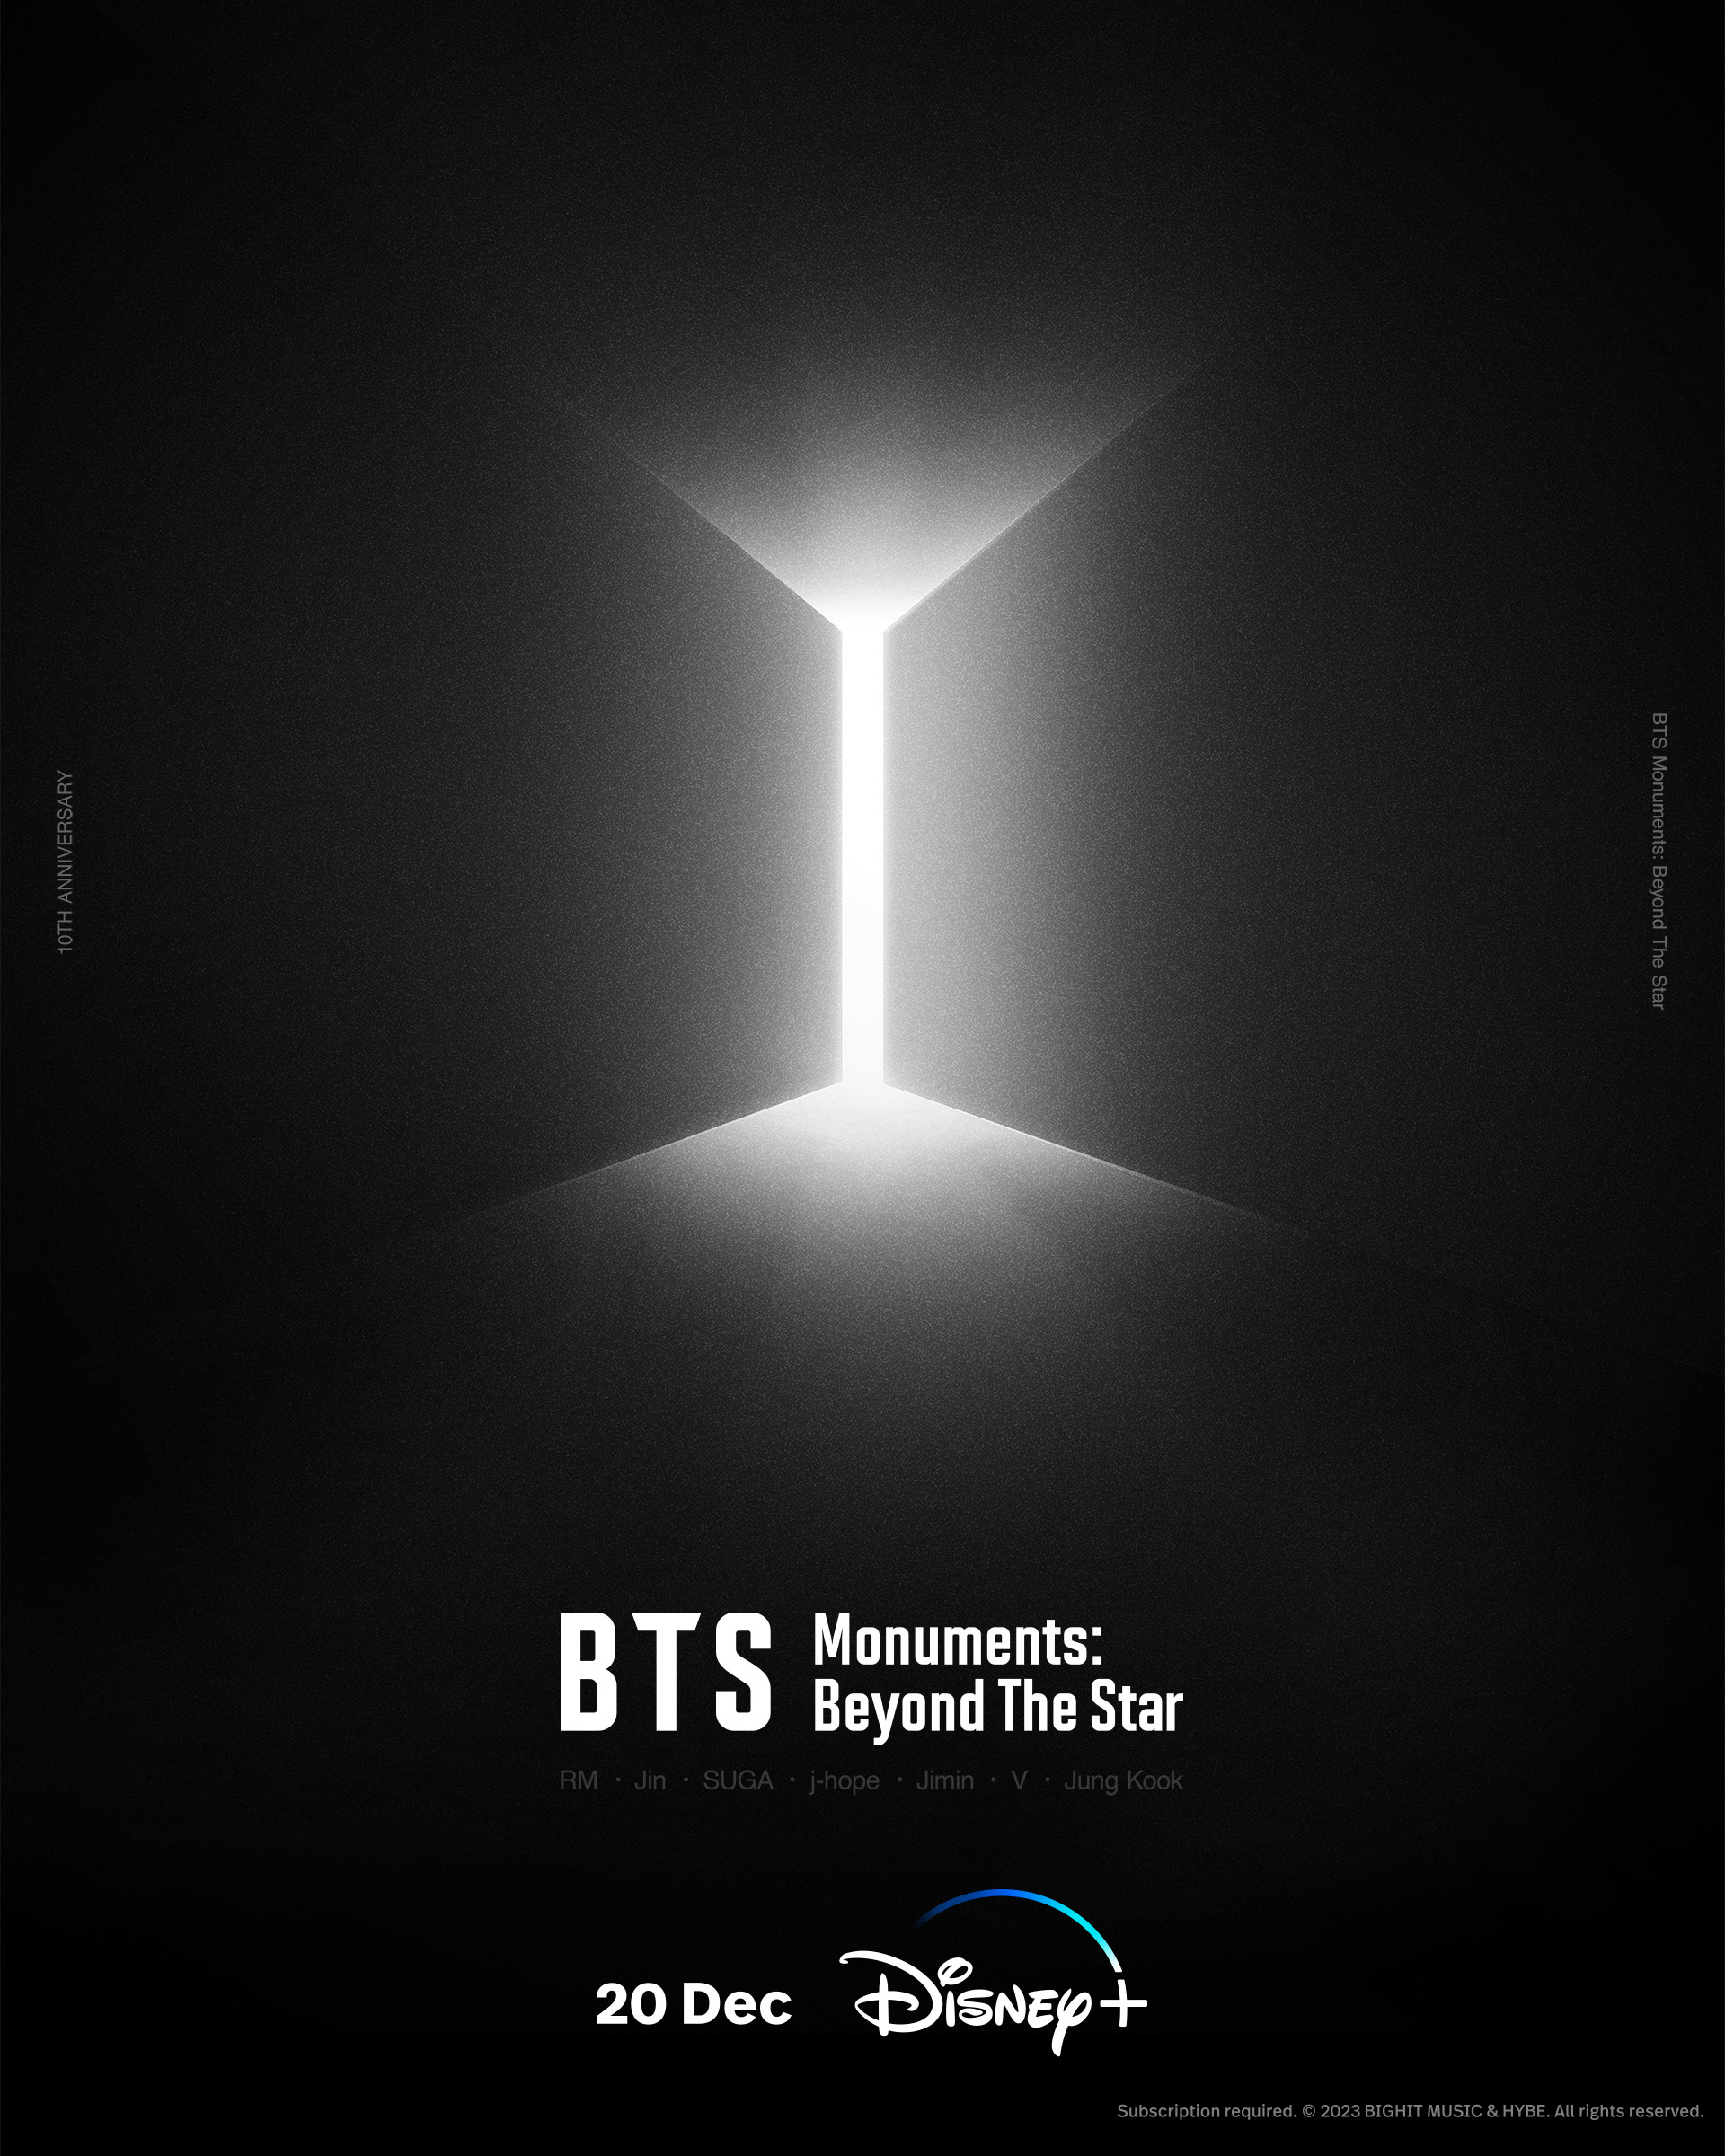 "BTS MONUMENTS: BEYOND THE STAR"  Documentary to Debut Exclusively on Disney+ on December 20